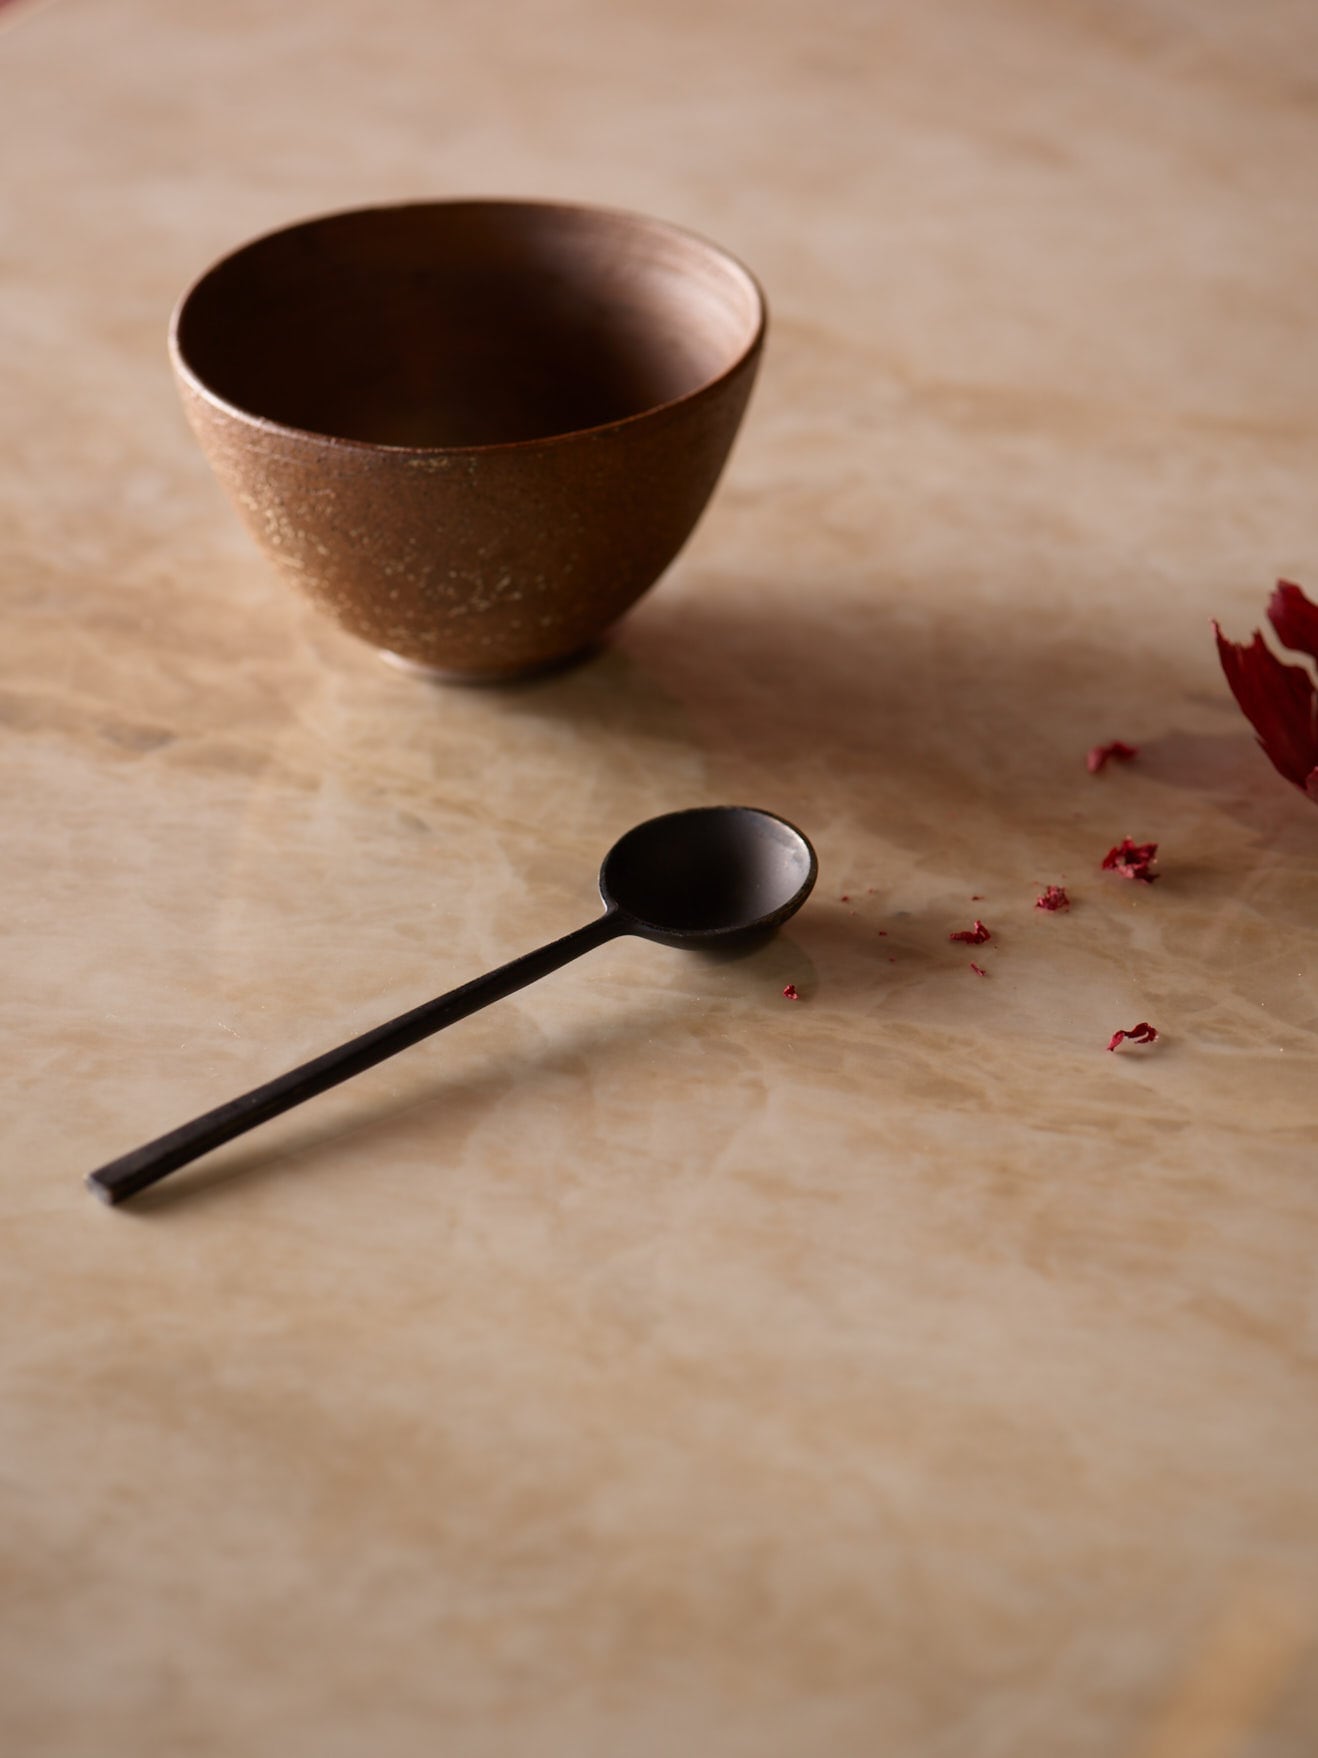 Spoon and bowl on a brown worktop